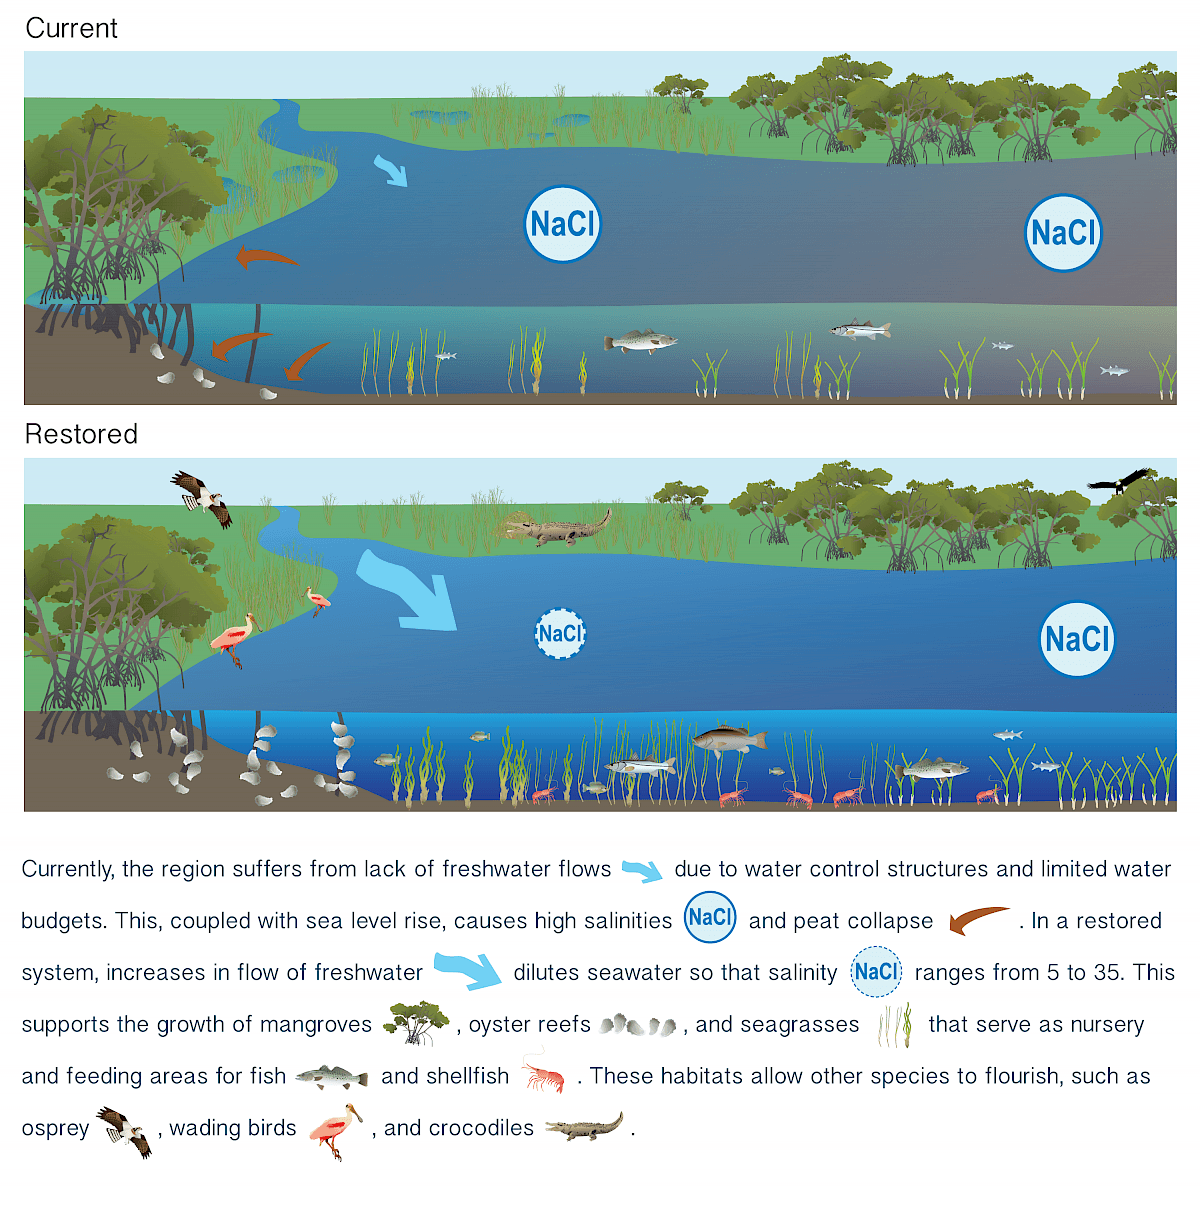 Currently, the region suffers from lack of freshwater flows due to water control structures and limited water budgets. This, coupled with sea level rise, causes high salinities and peat collapse. In a restored system, increases in flow of freshwater dilutes seawater so that salinity ranges from 5 to 35. This supports the growth of mangroves, oyster reefs, and seagrasses that serve as nursery and feeding areas for fish and shellfish. These habitats allow other species to flourish, such as osprey, wading birds, and crocodiles.